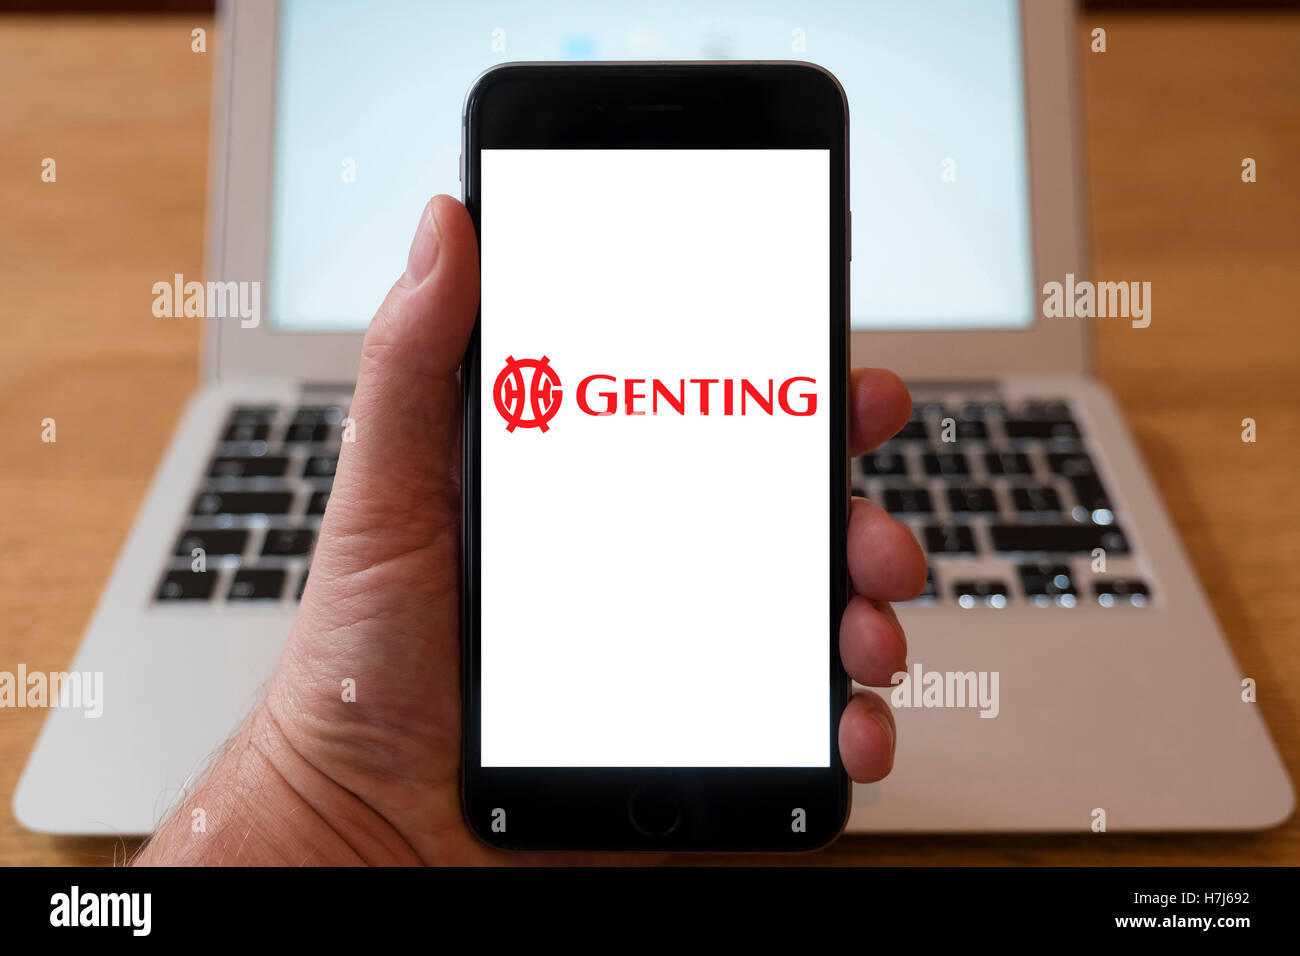 Using iPhone smart phone to display logo of Genting Malaysian conglomerate, operator of casinos and resorts. Stock Photo